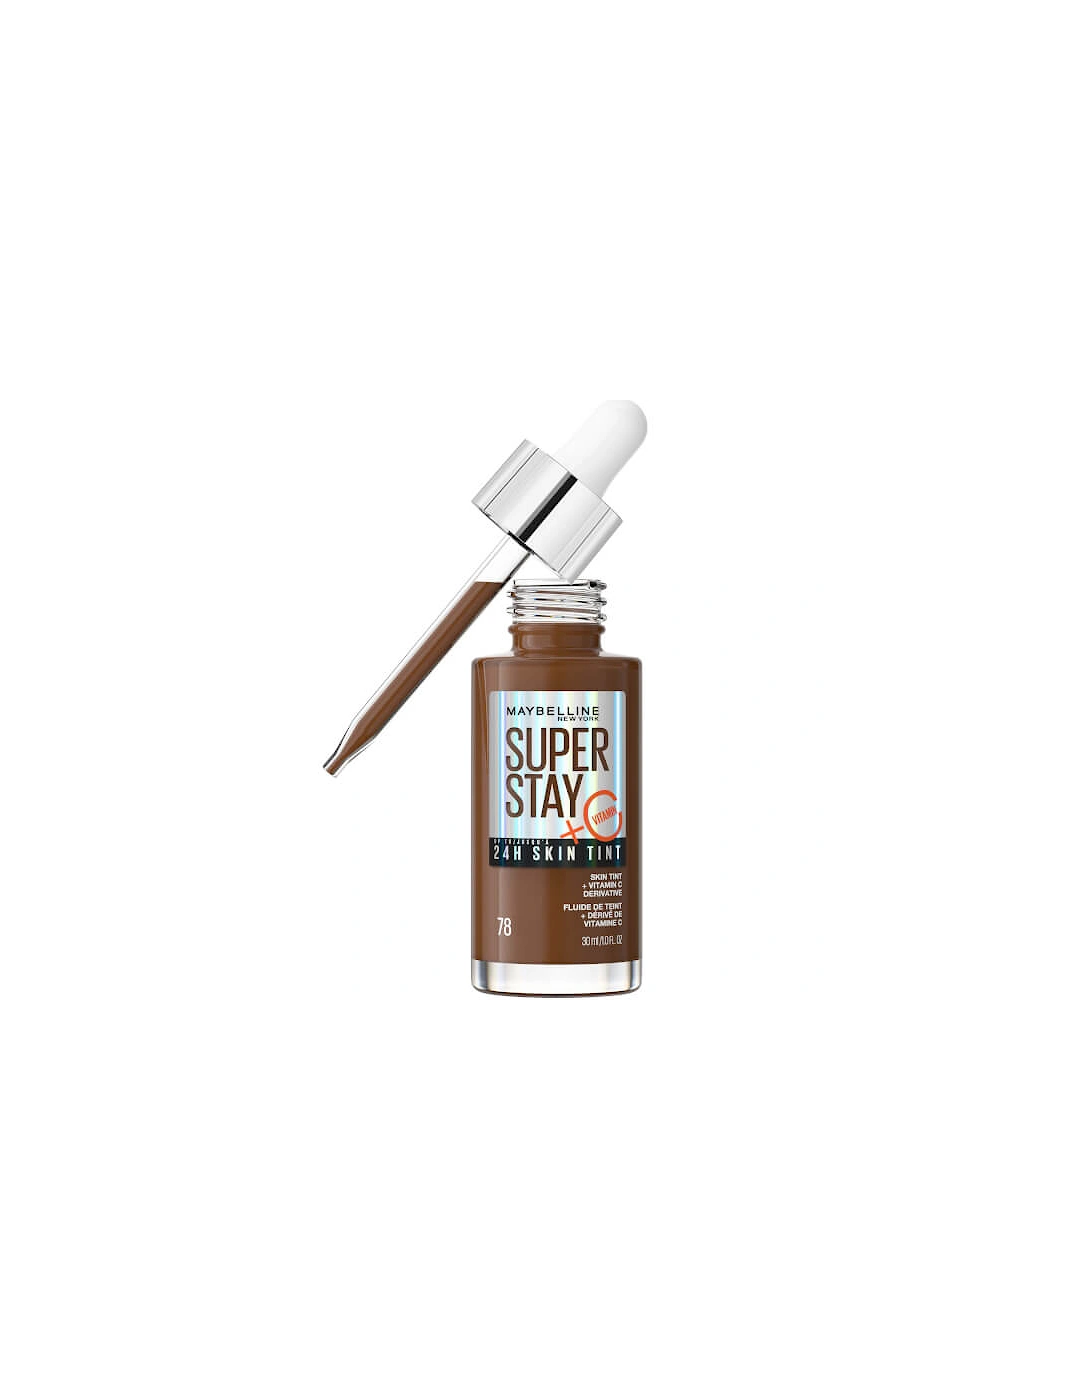 Super Stay up to 24H Skin Tint Foundation + Vitamin C - Shade 78, 2 of 1